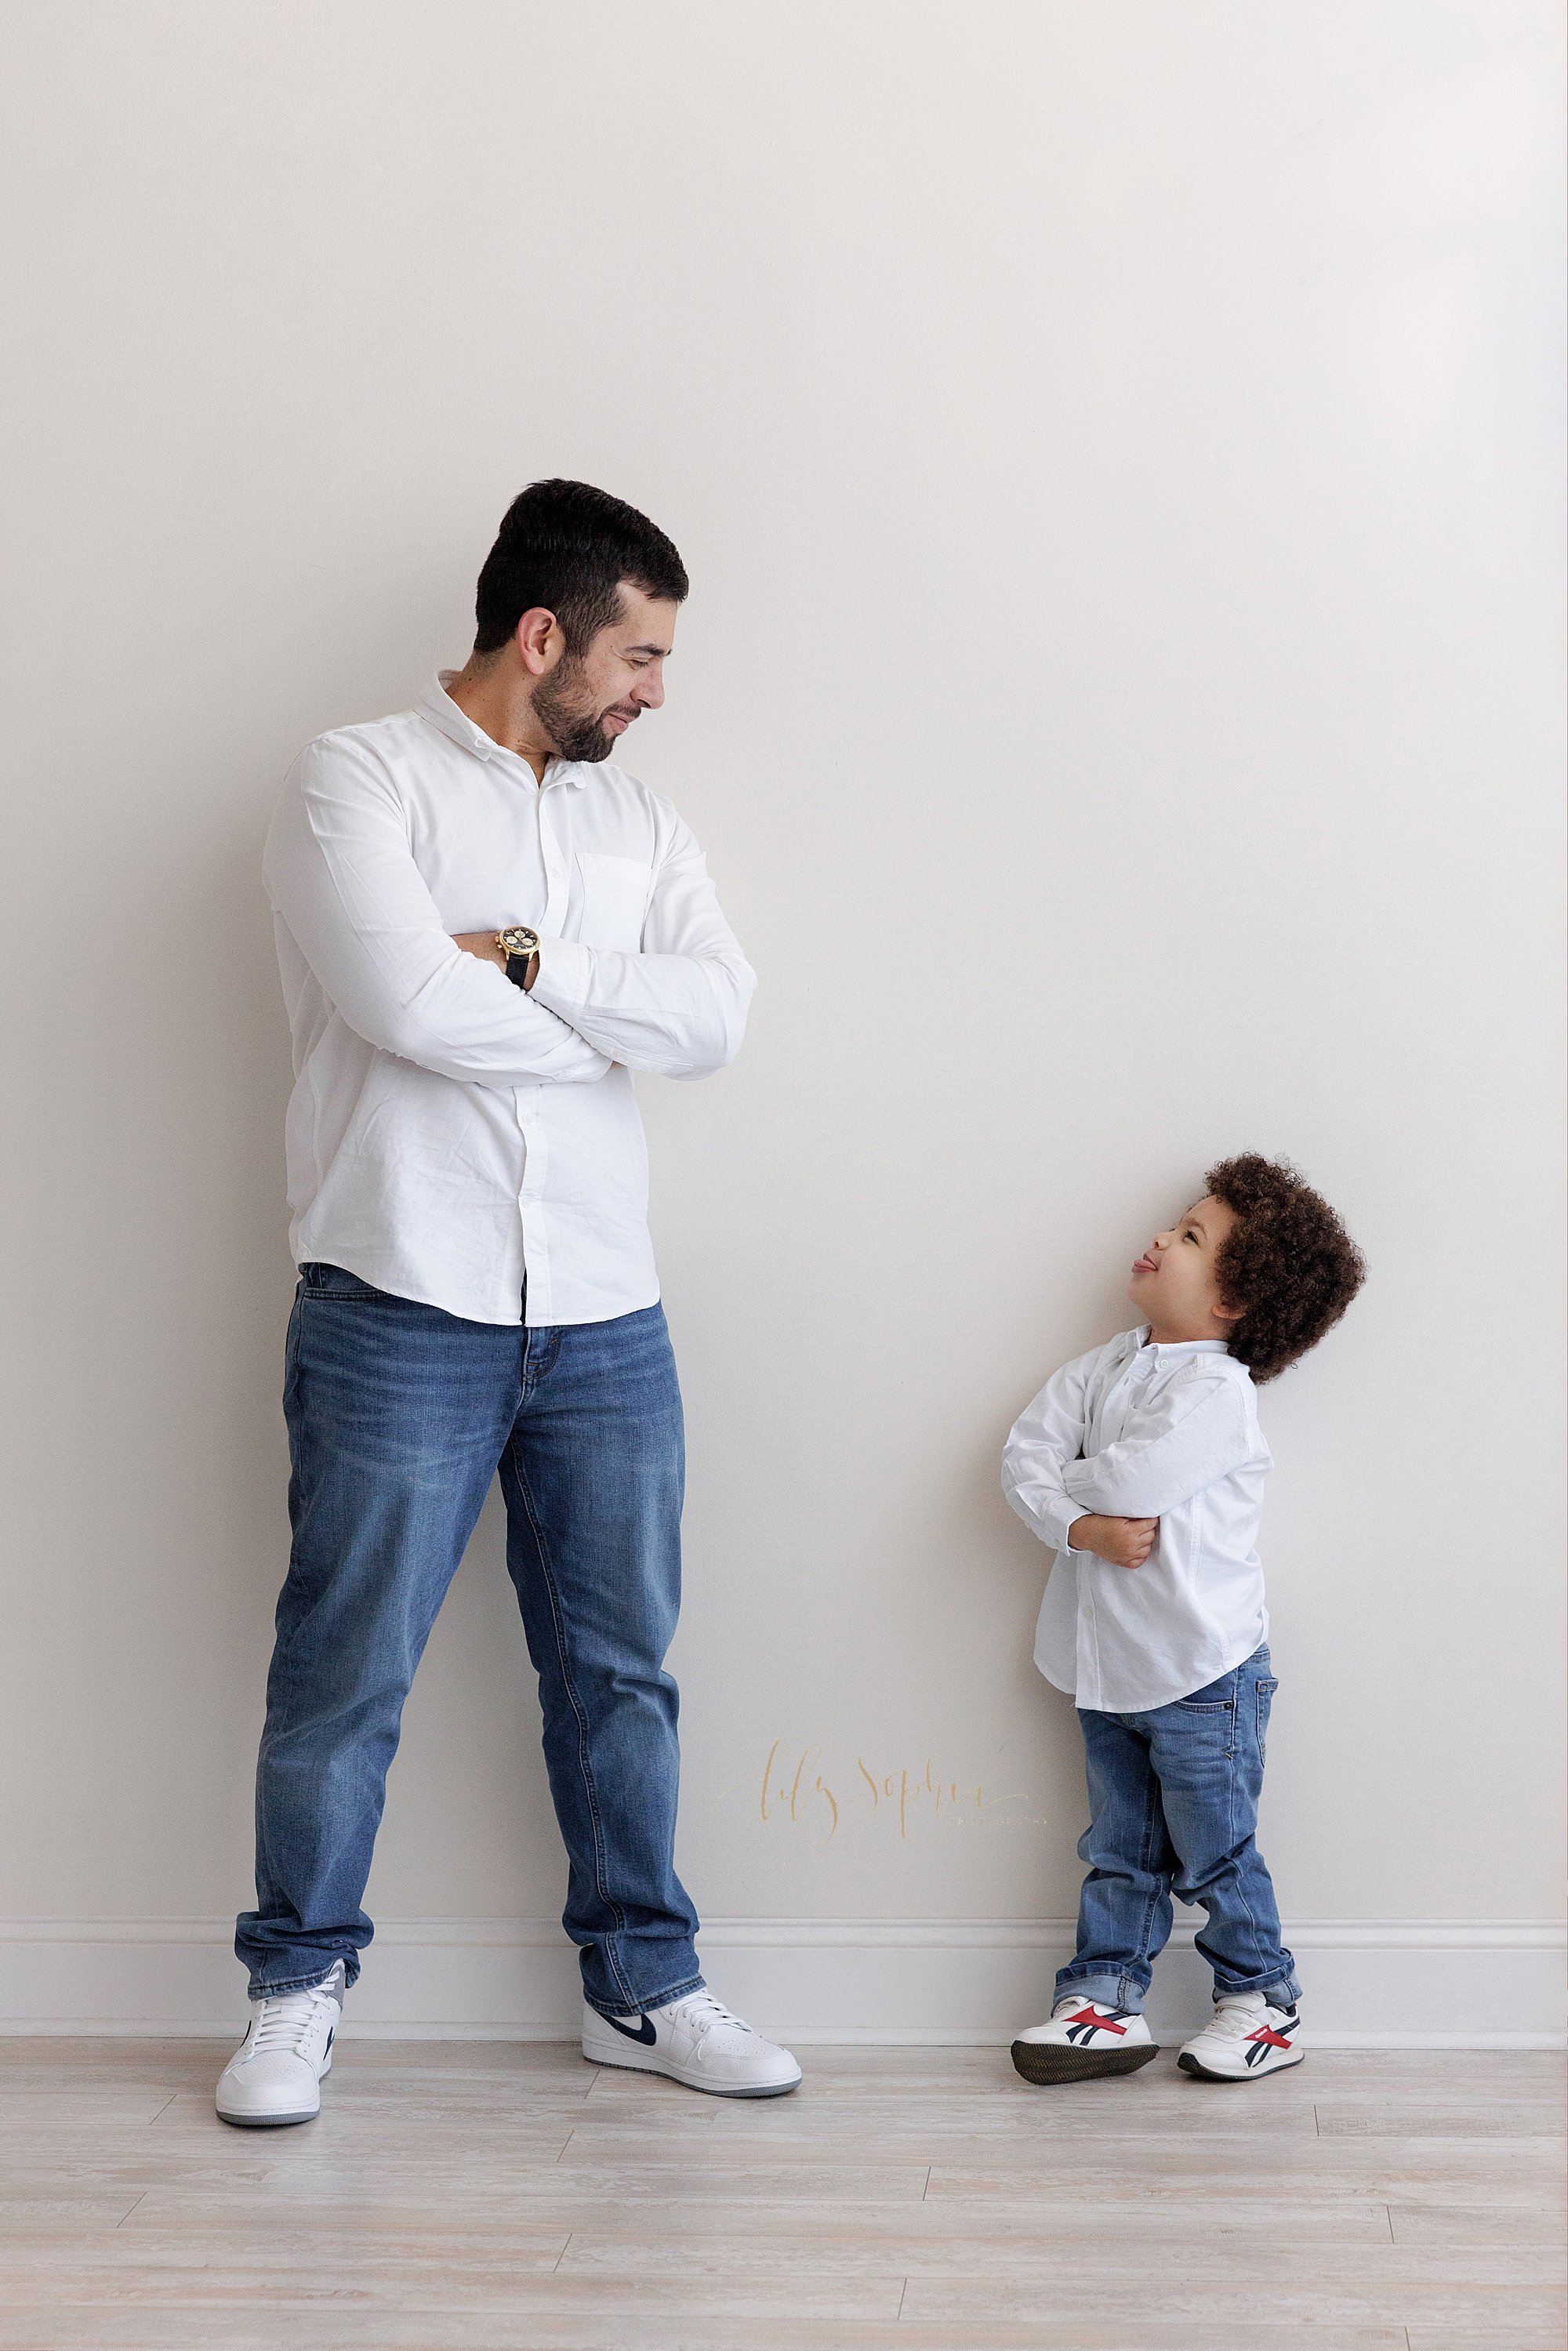  Family father and son picture with the father standing with his arms folded across his chest as he turns his head over his left shoulder to look down at his young son who is standing and folding his arms over his chest and looks up to his father tak